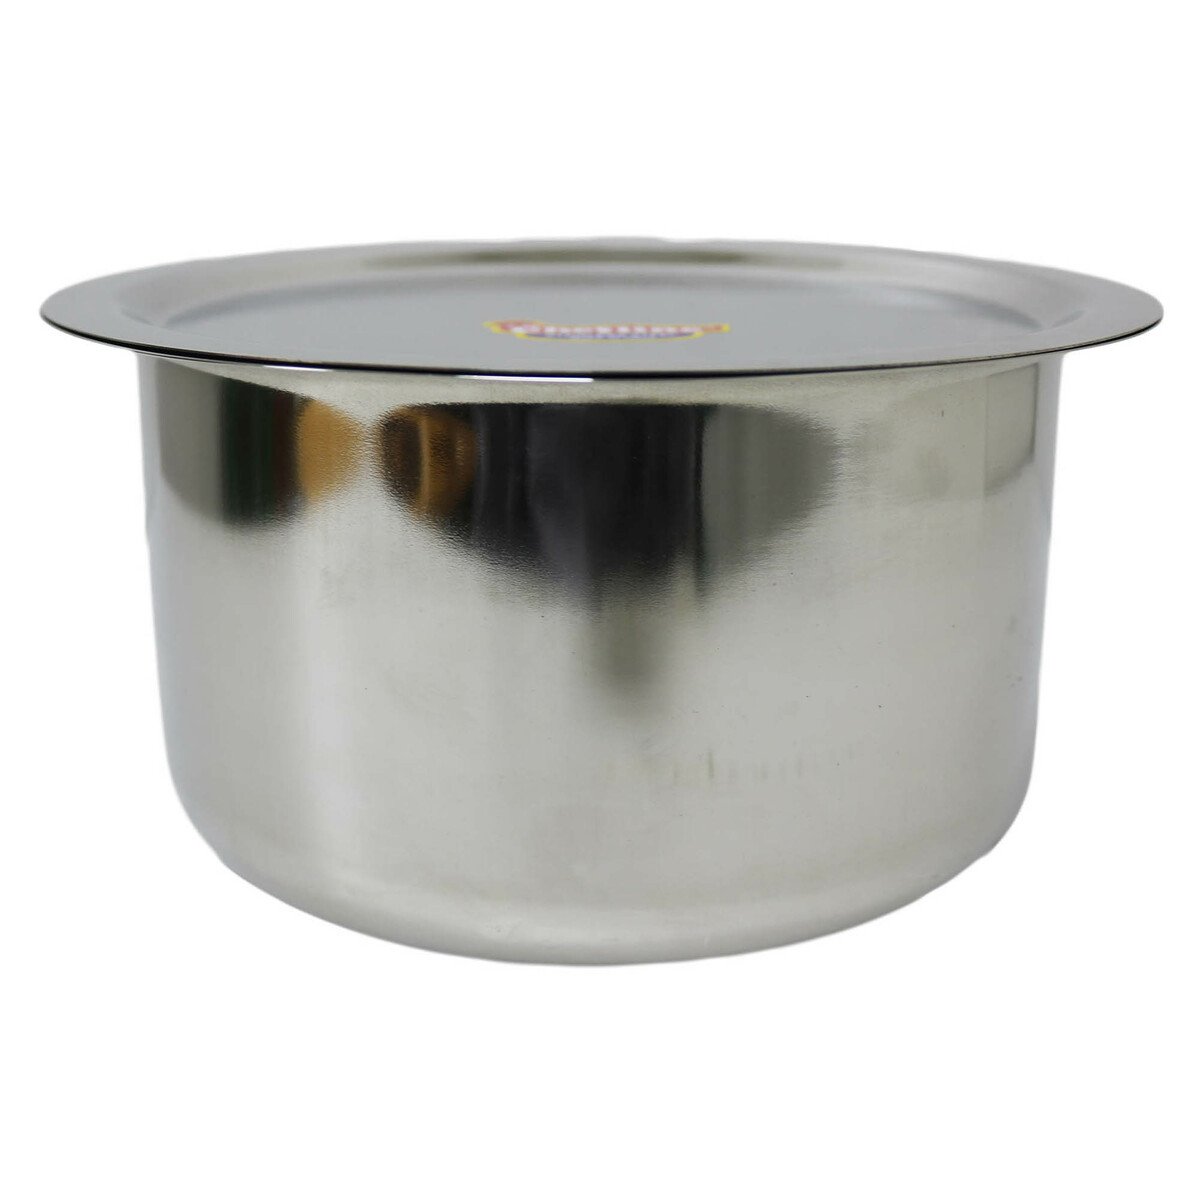 Chefline Top Set Stainless Steel With Lid 14cm